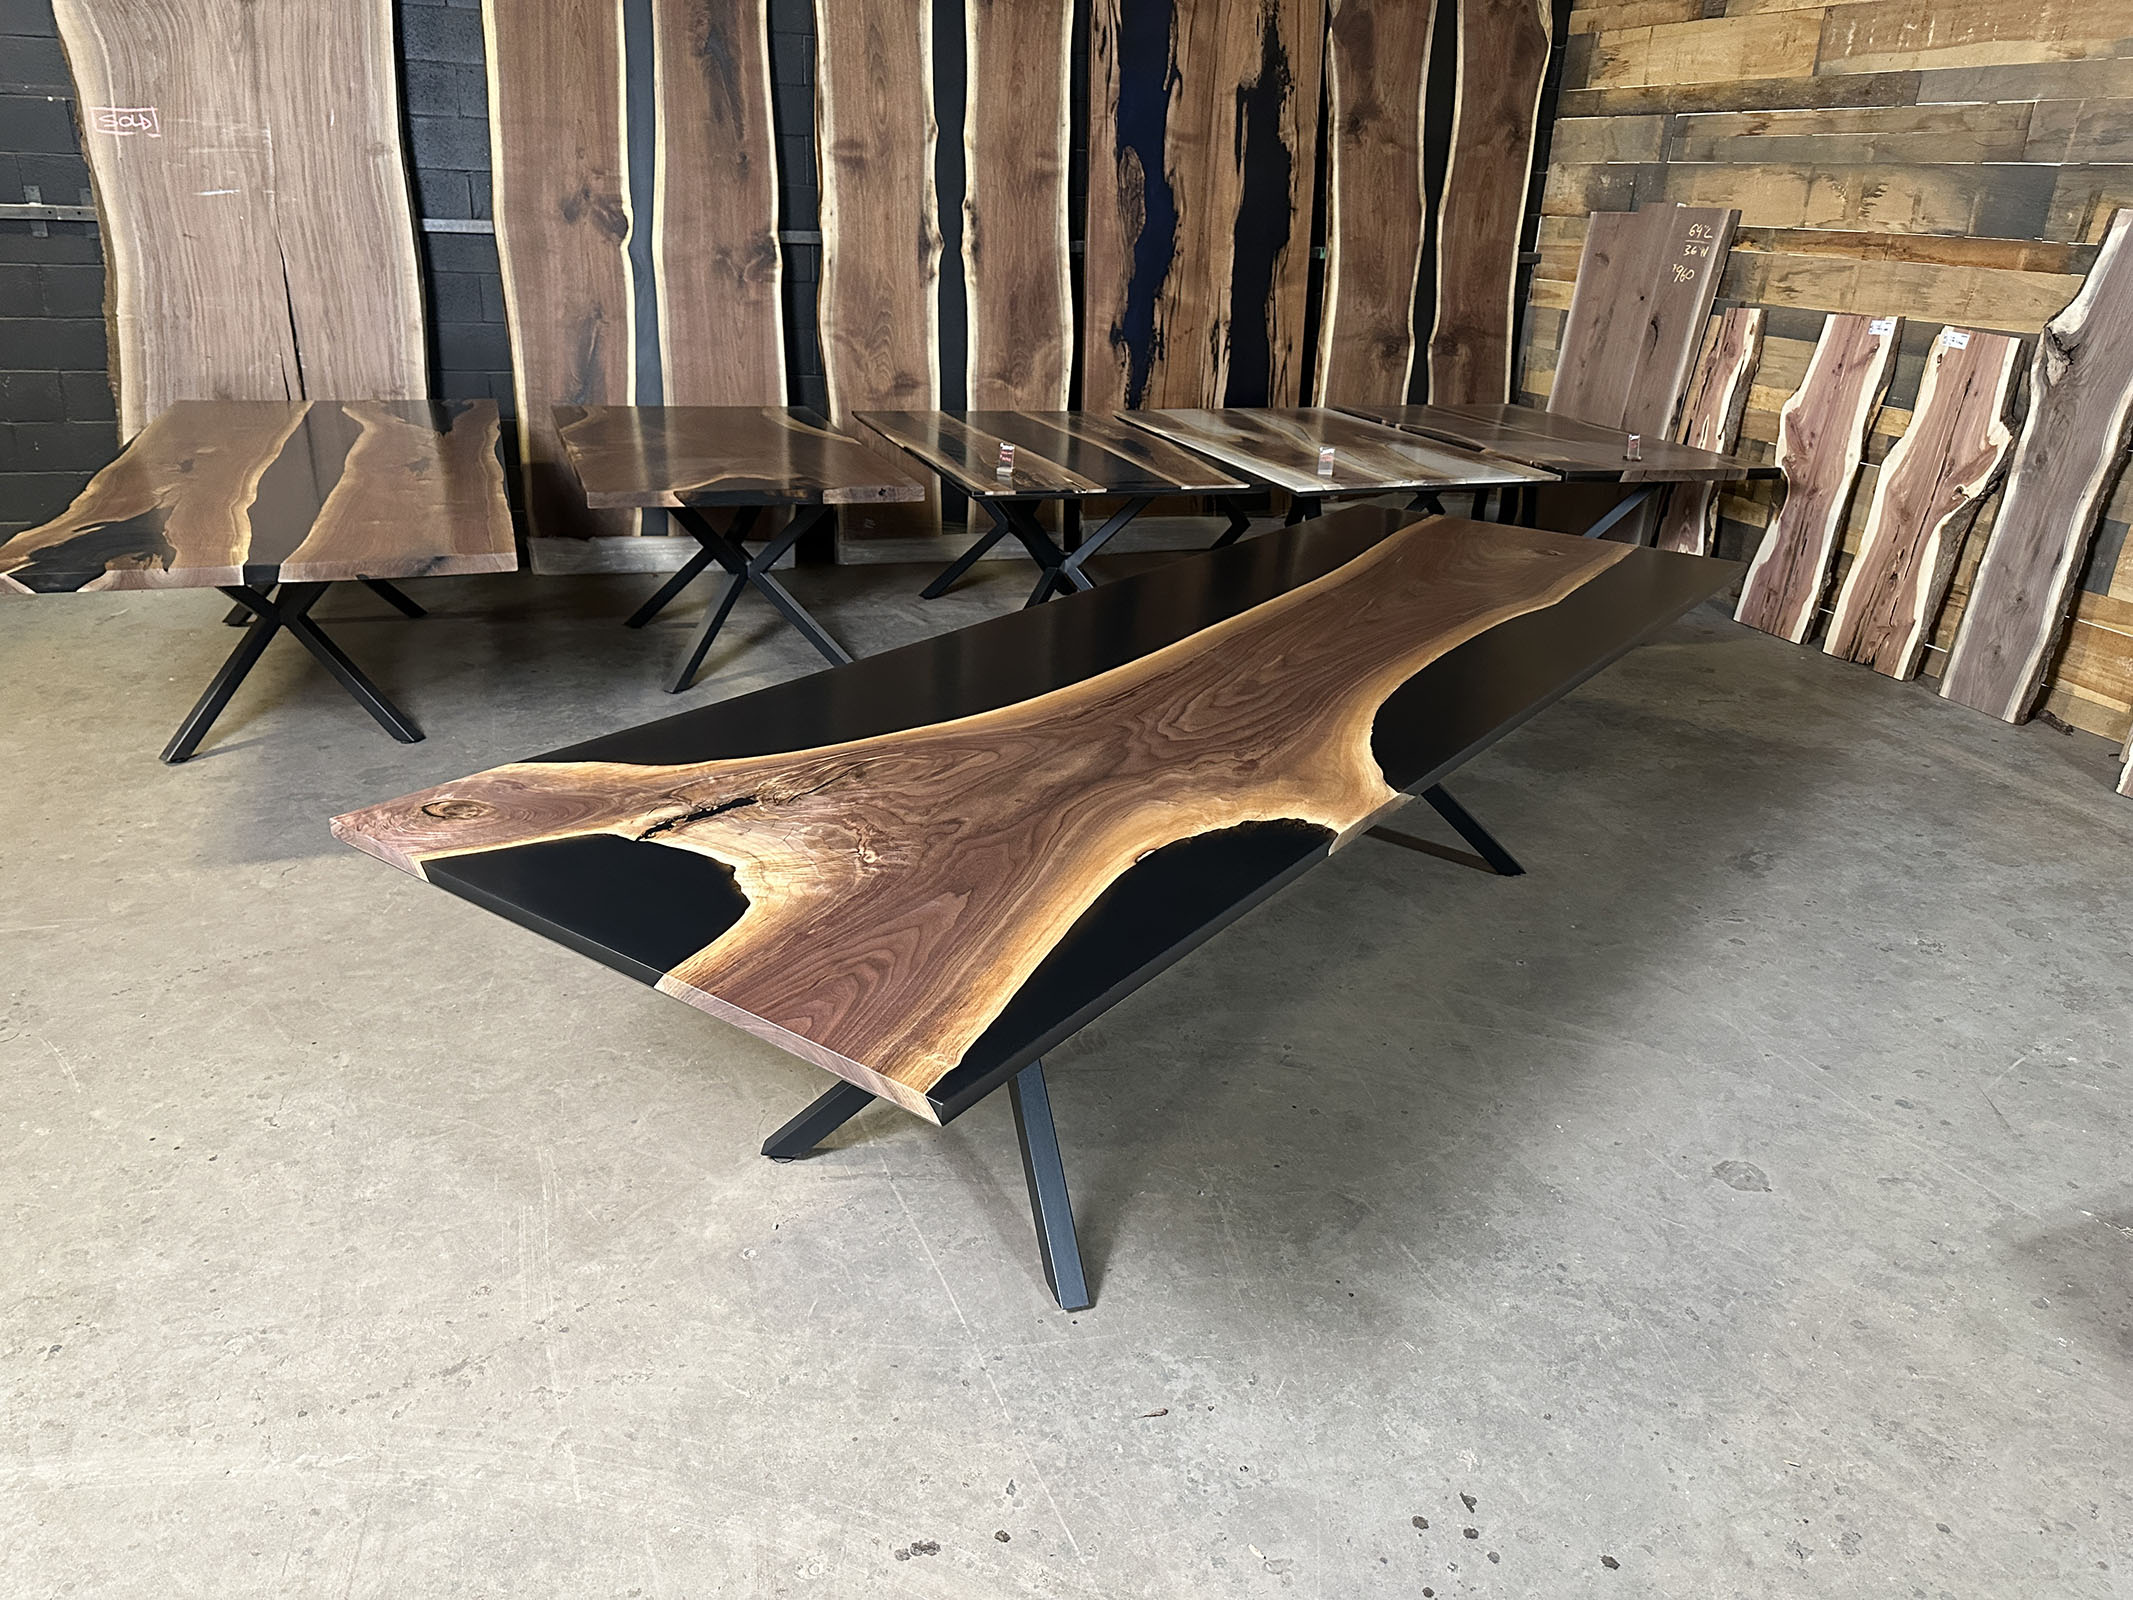 The Beauty and Versatility of Epoxy Tables